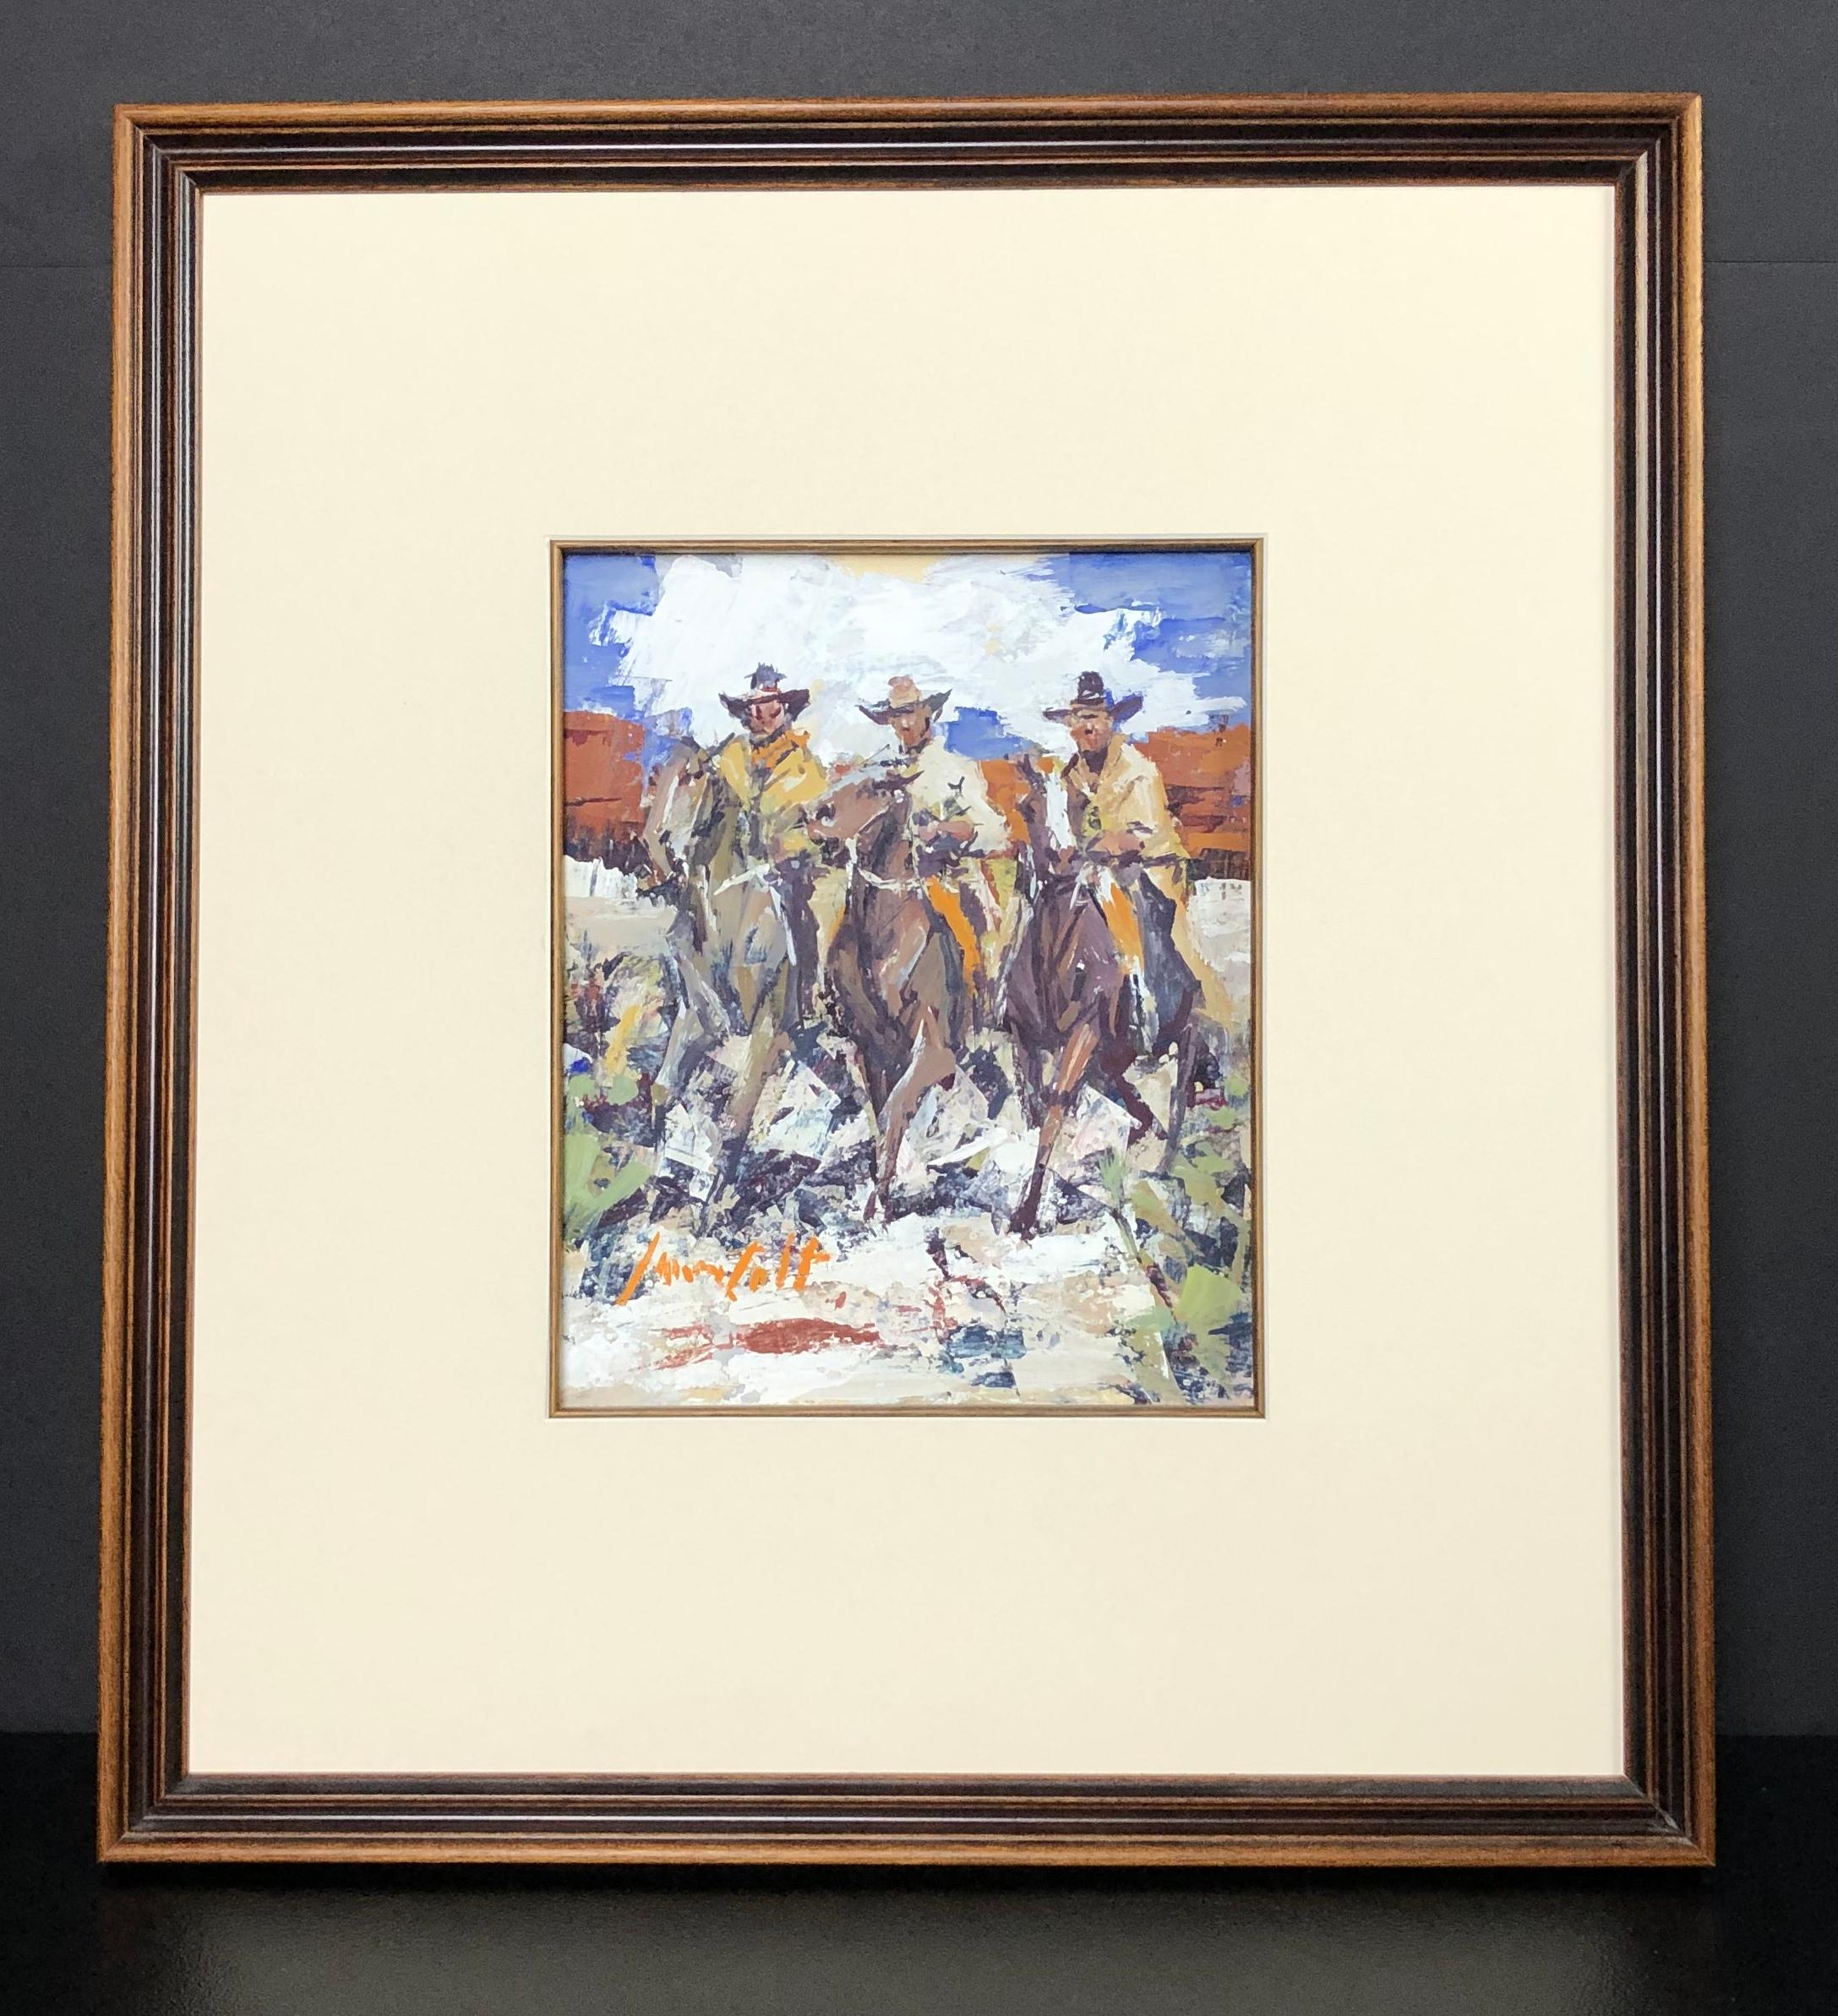 Watercolor by American Western artist James Lee Colt (1922-2005 Palm Springs, CA)
Original signed gouache watercolor painting featuring cowboy scene by Western Artist James Colt.
Three cowboys on horse back.
Signed lower left.
Info on the artist on